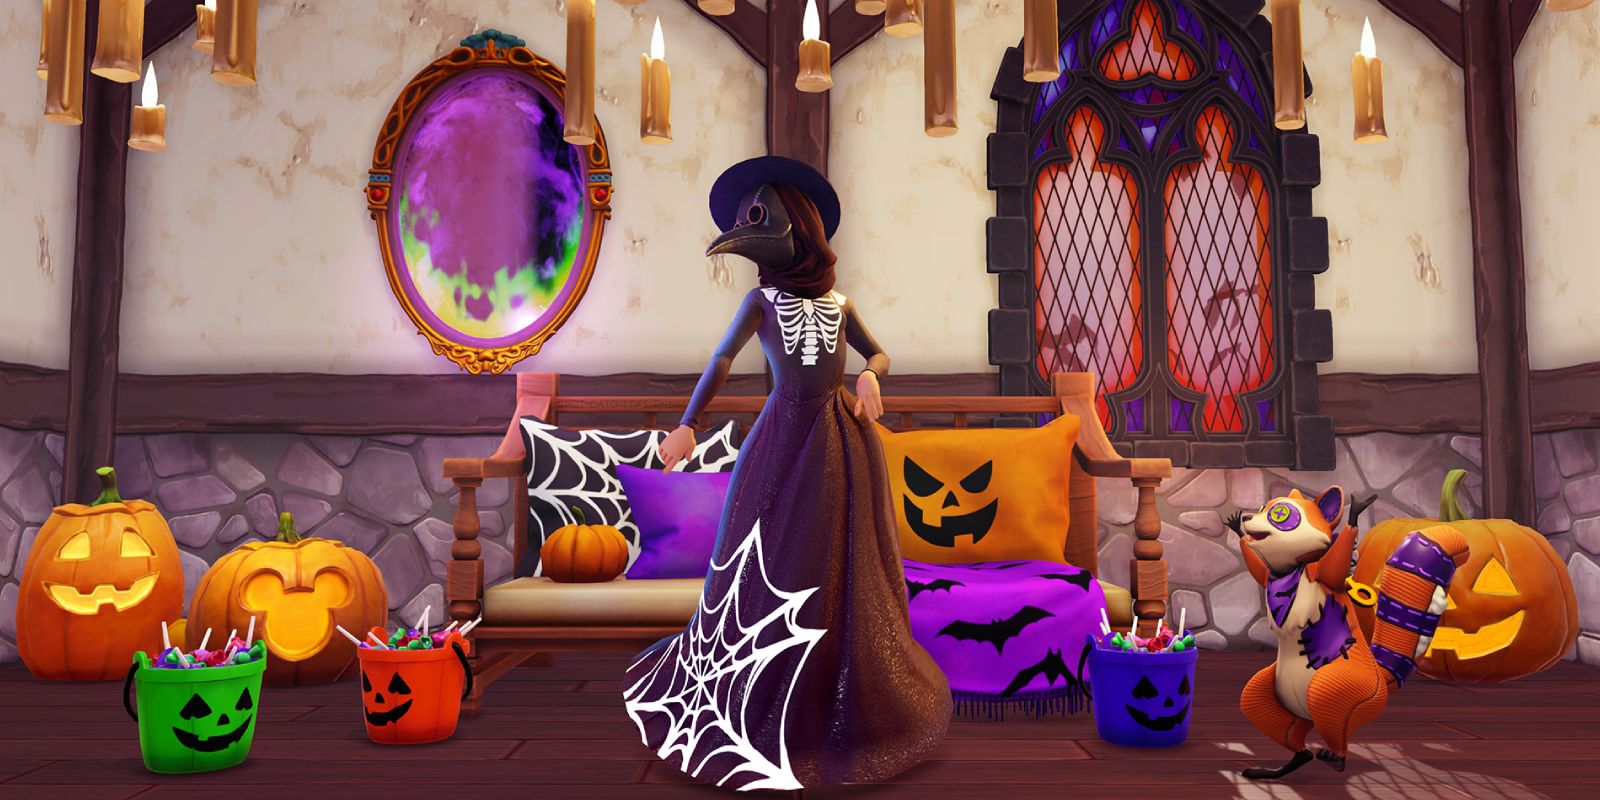 A Disney Dreamlight Valley player surrounded by Halloween decorations and outfits.